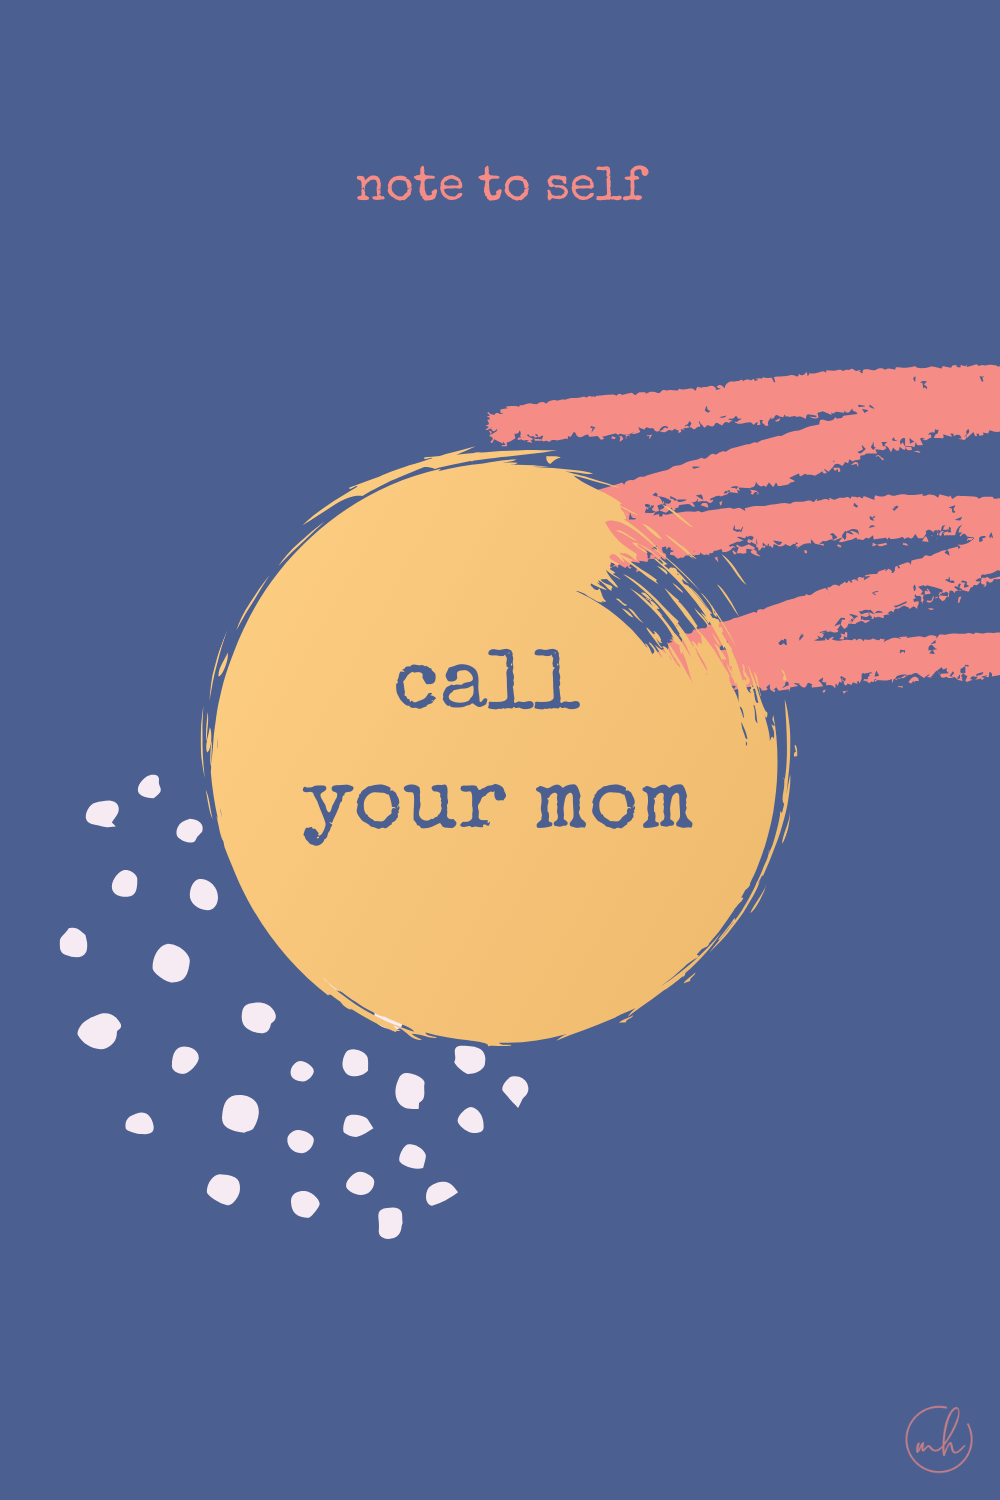 Call your mom - Note to self quotes | myhoogah